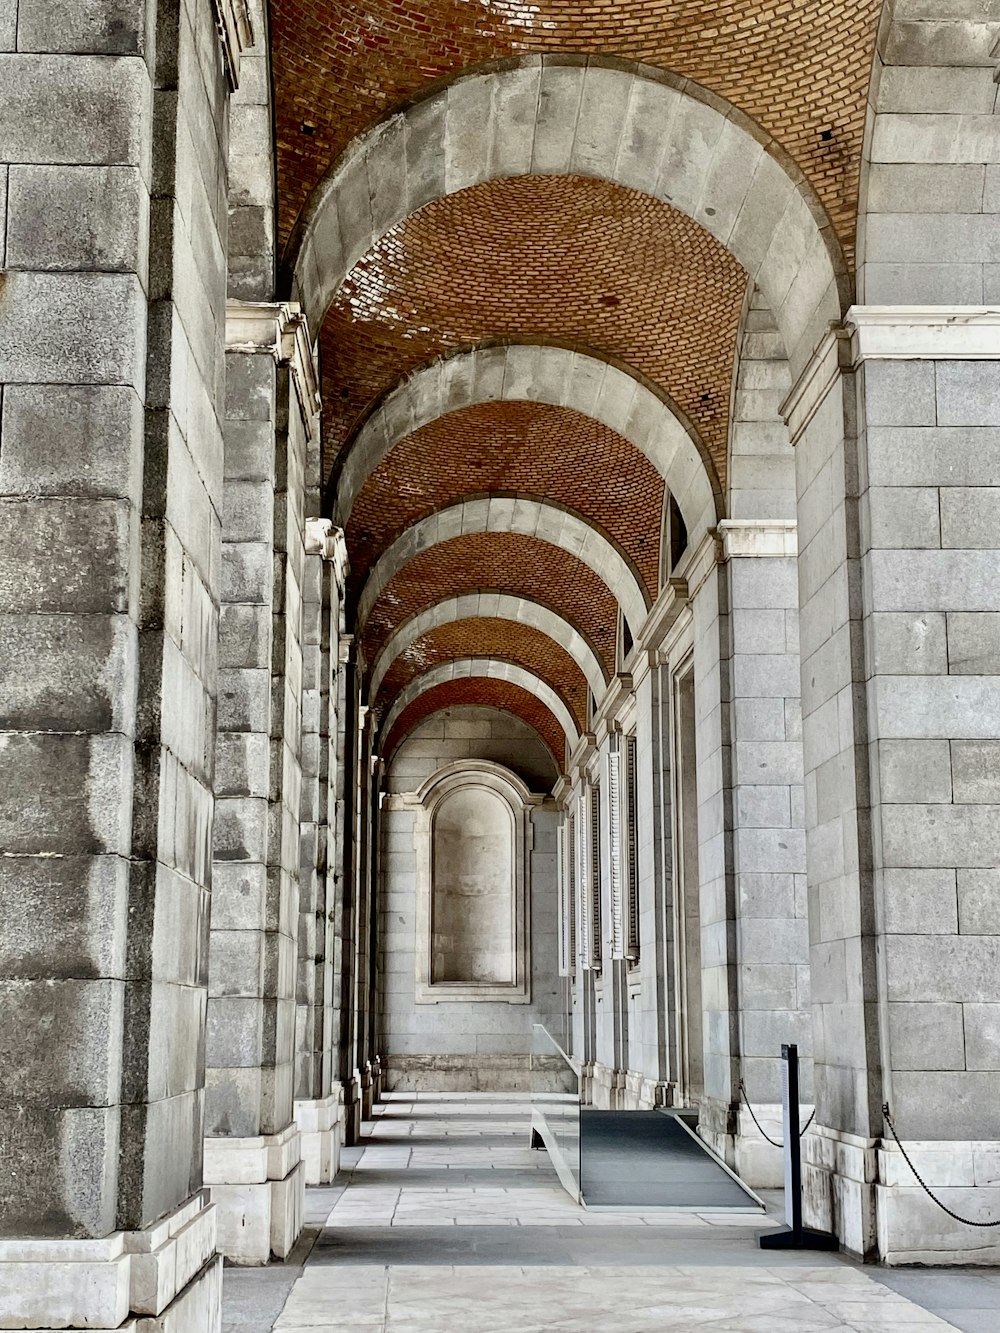 a long hallway with a brick ceiling and arches